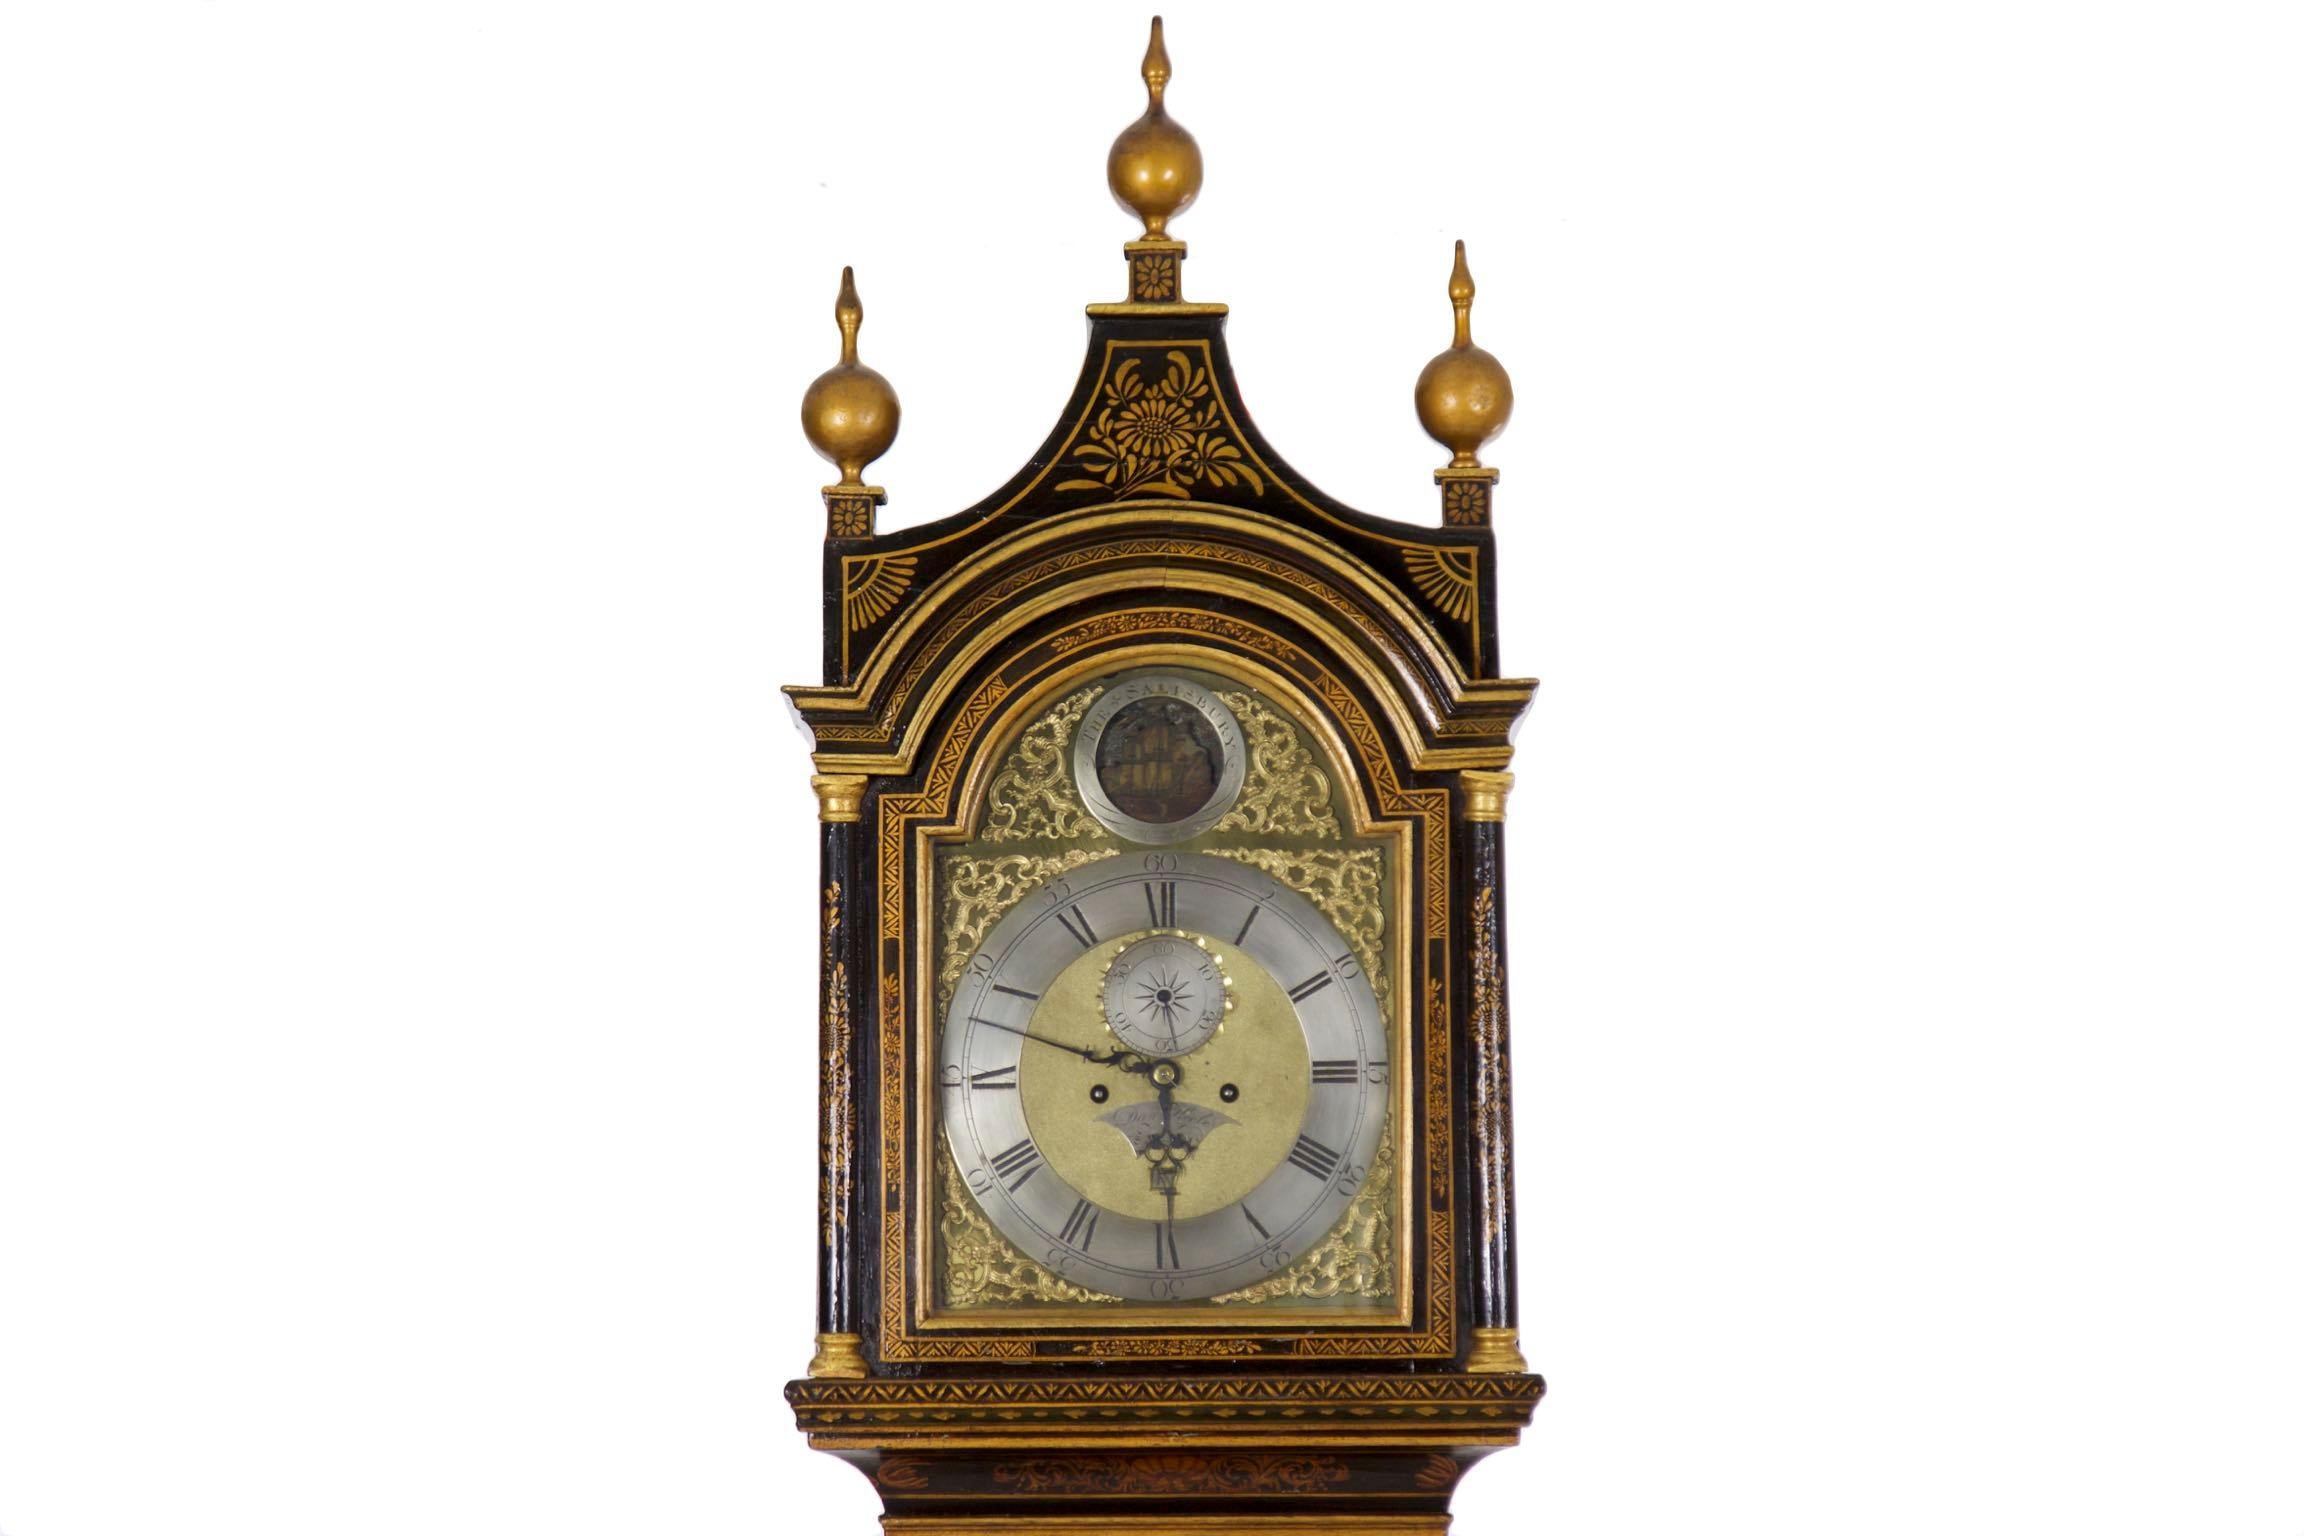 A very fine George III period black lacquer japanned longcase clock with a movement by Daniel Keele of Salisbury, it is a very fine presentation piece. The pagoda top is crested by three swollen bulb gilded finials, the domed door of the hood